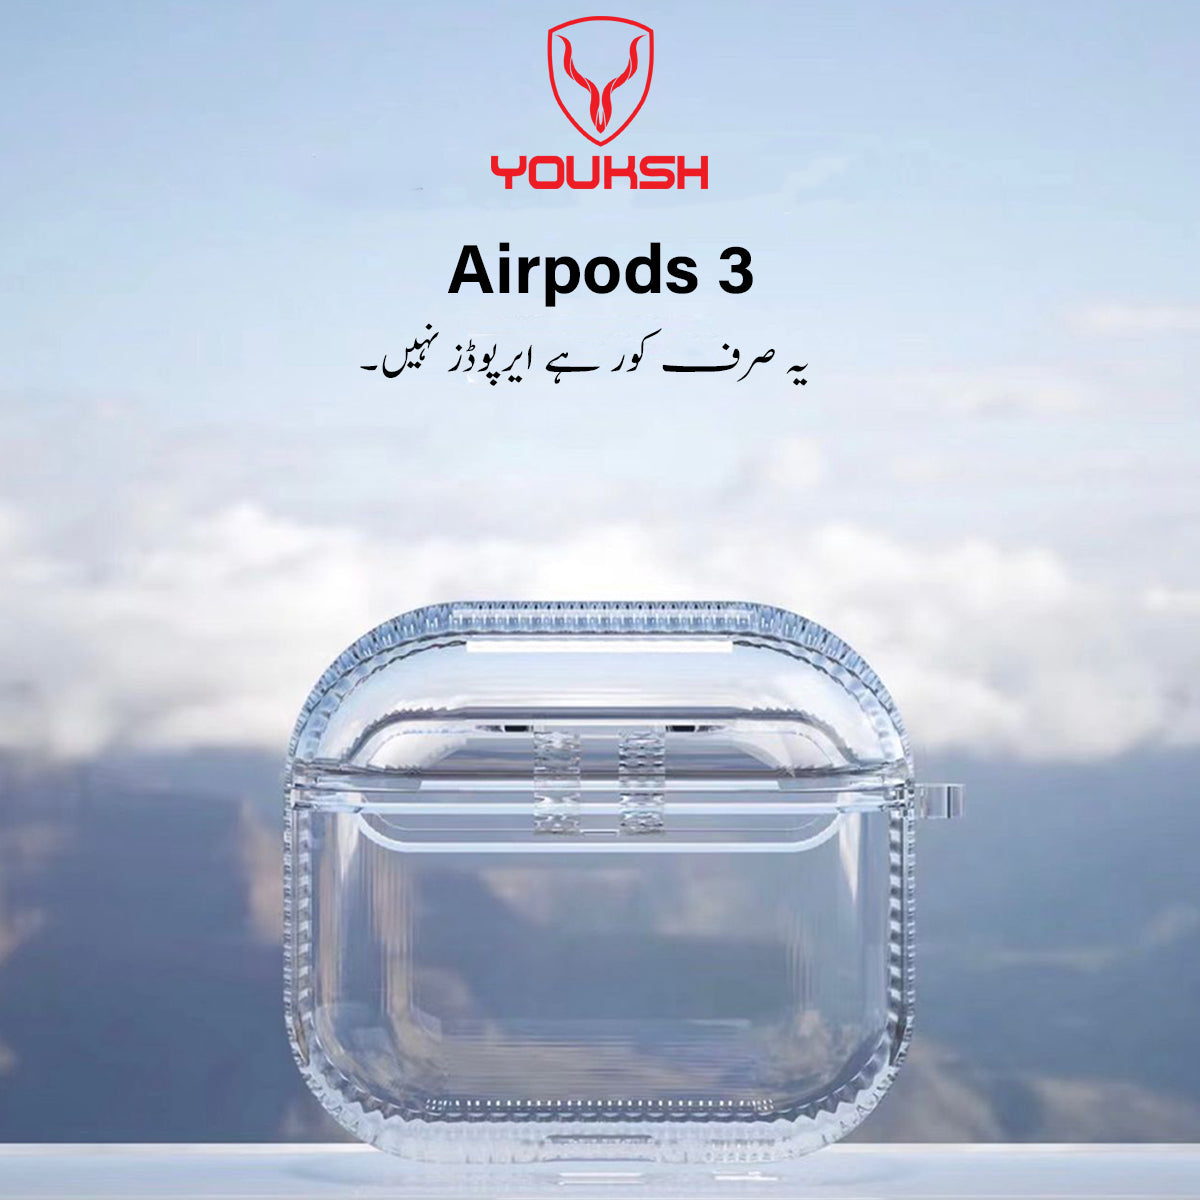 YOUKSH Airpods 3 Transparent Case - Airpods Generation 3 Transparent Silicone Cover - Airpods Generation 3 High Quality Transparent Case Only.